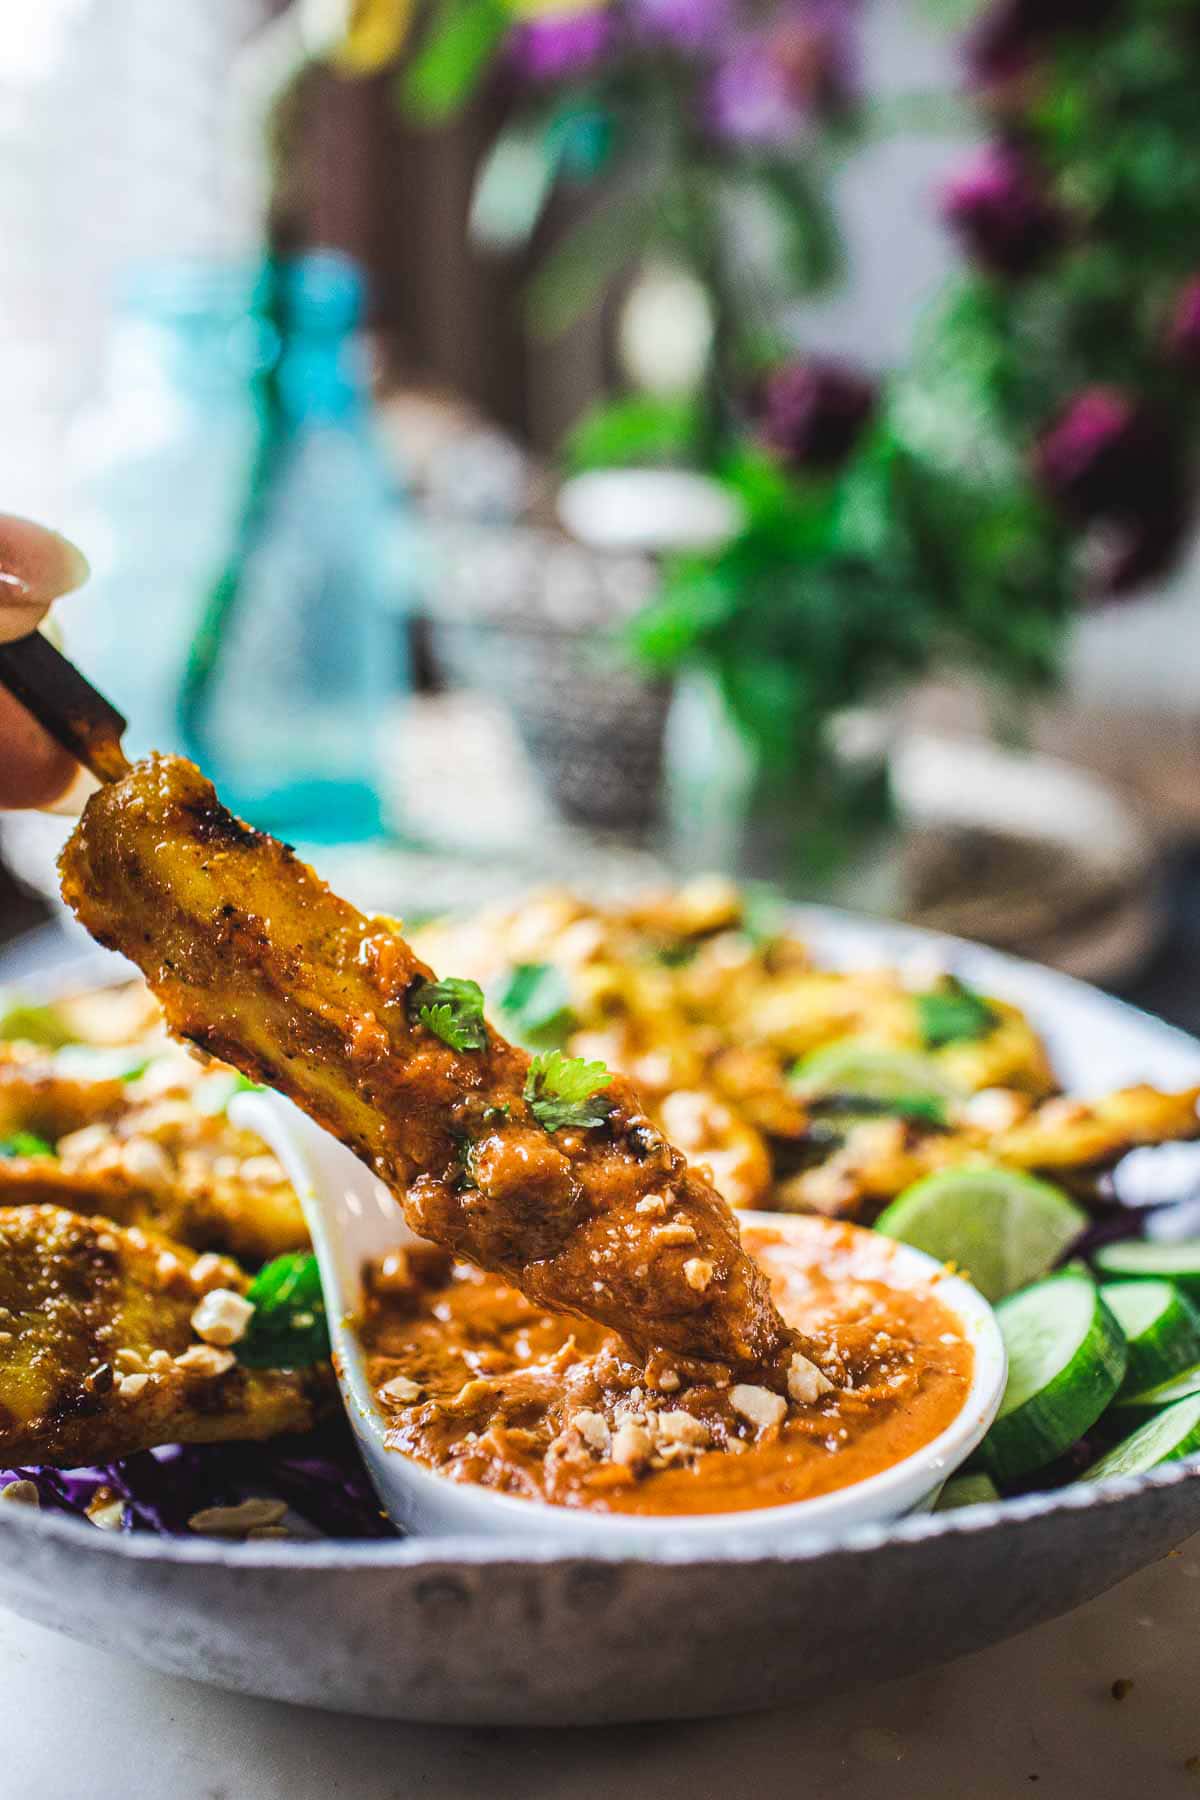 This recipe for Chicken Satay is bursting with authentic Thai flavor! Chicken (or tofu) is bathed in a fragrant marinade of coconut milk and Thai spices, then grilled to perfection and served with a flavorful peanut dipping sauce.  Vegan-adaptable!